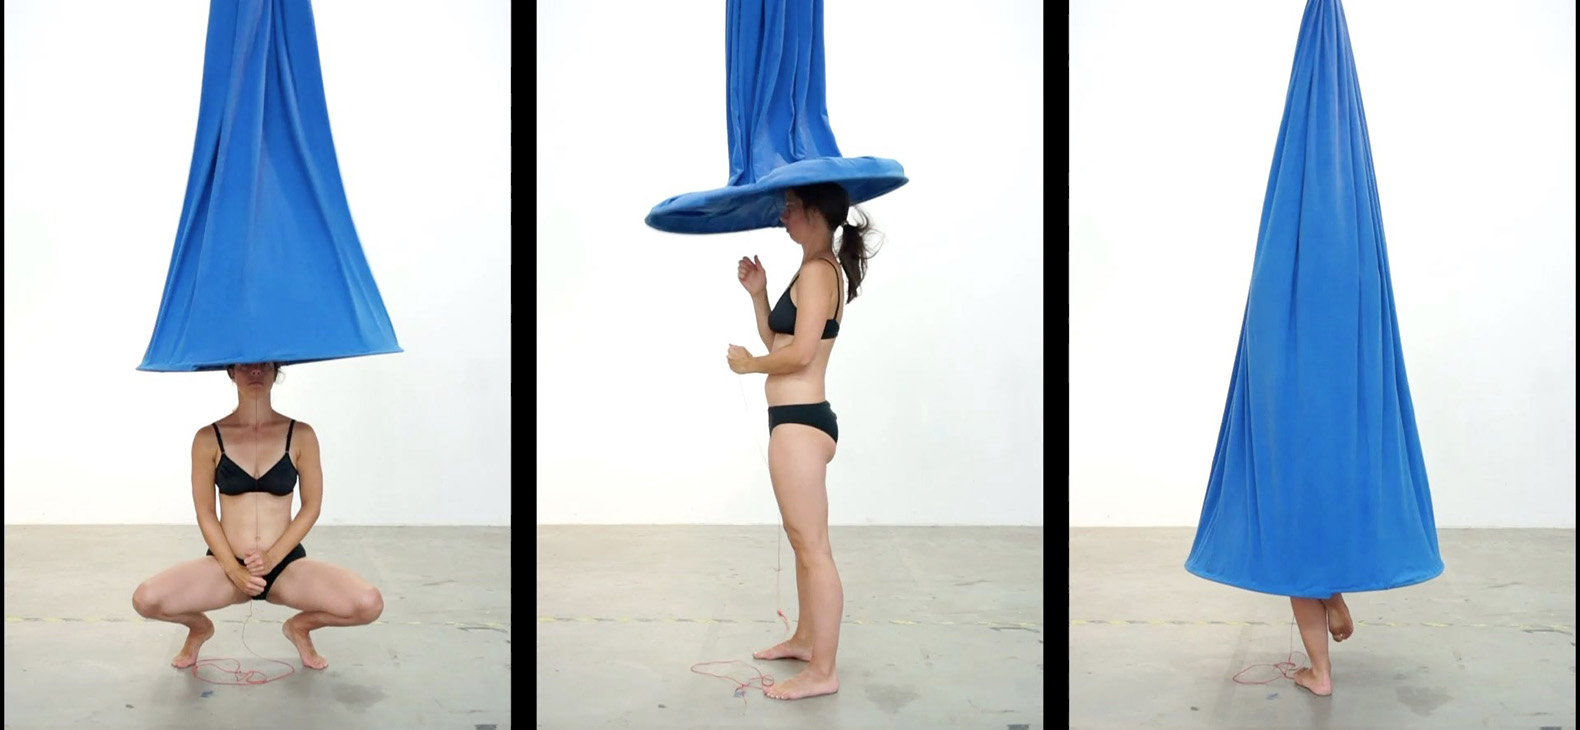 Video still from the project "Triade" by artist Maria Berauer. Three vertical video tracks lined up next to each other. Artist Maria Berauer pulling a blue fabric, which is attached to a metal ring at the bottom and hangs down from the ceiling, over her body at different heights. 